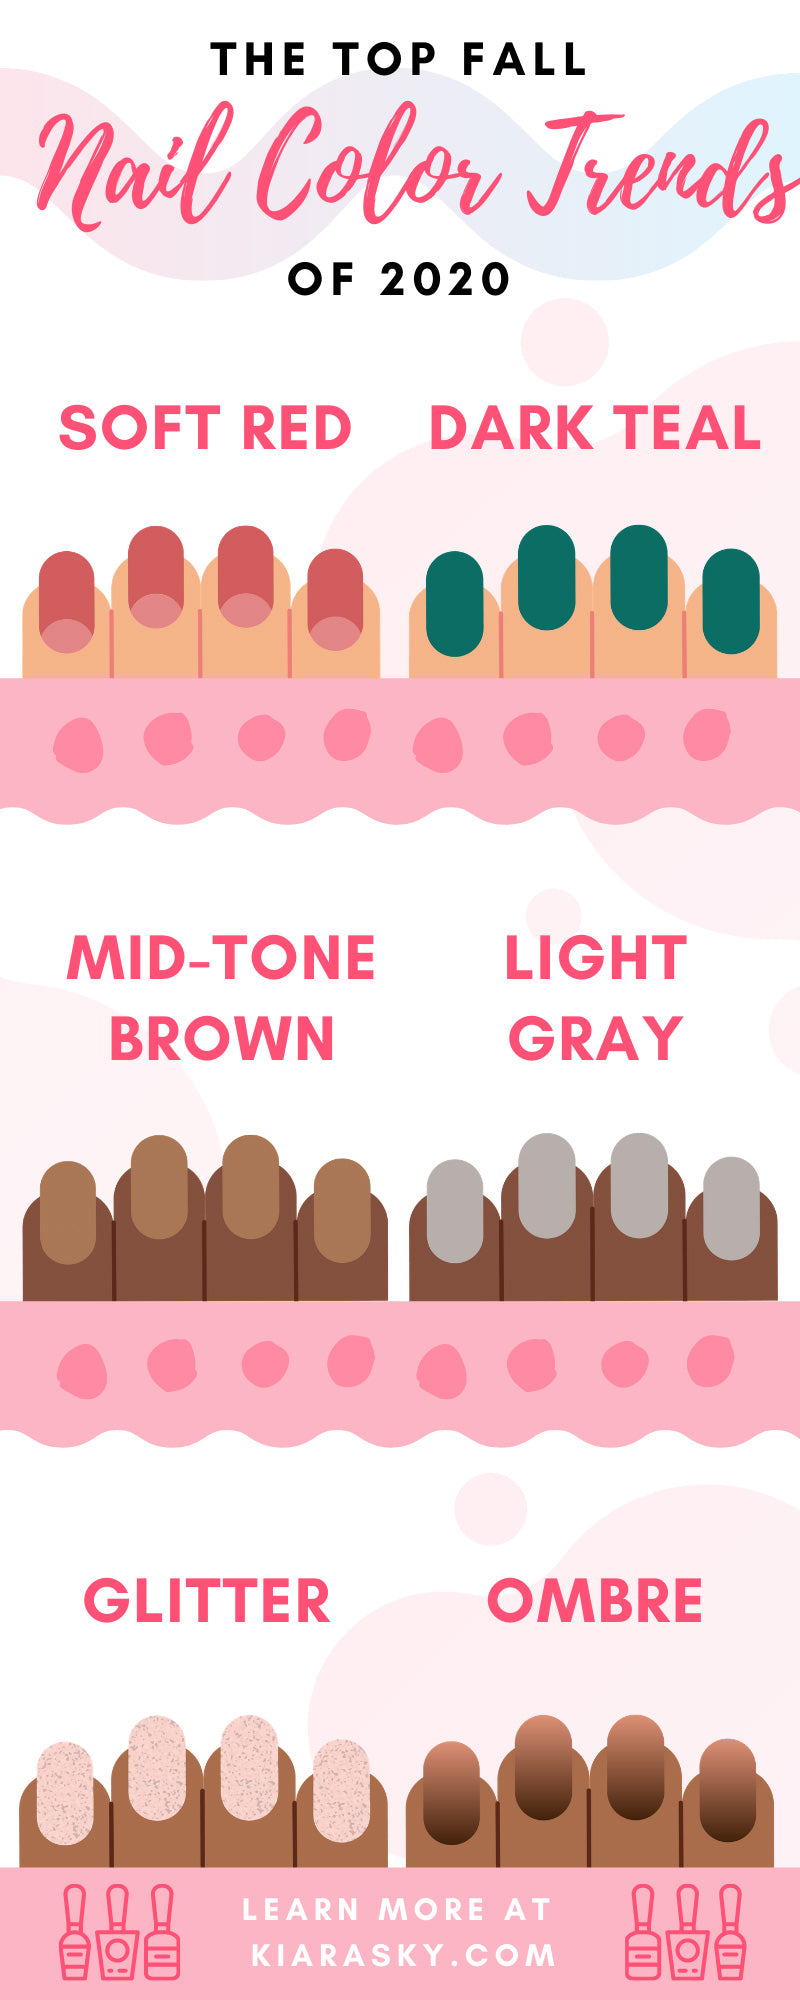 The Top Fall Nail Color Trends of 2020